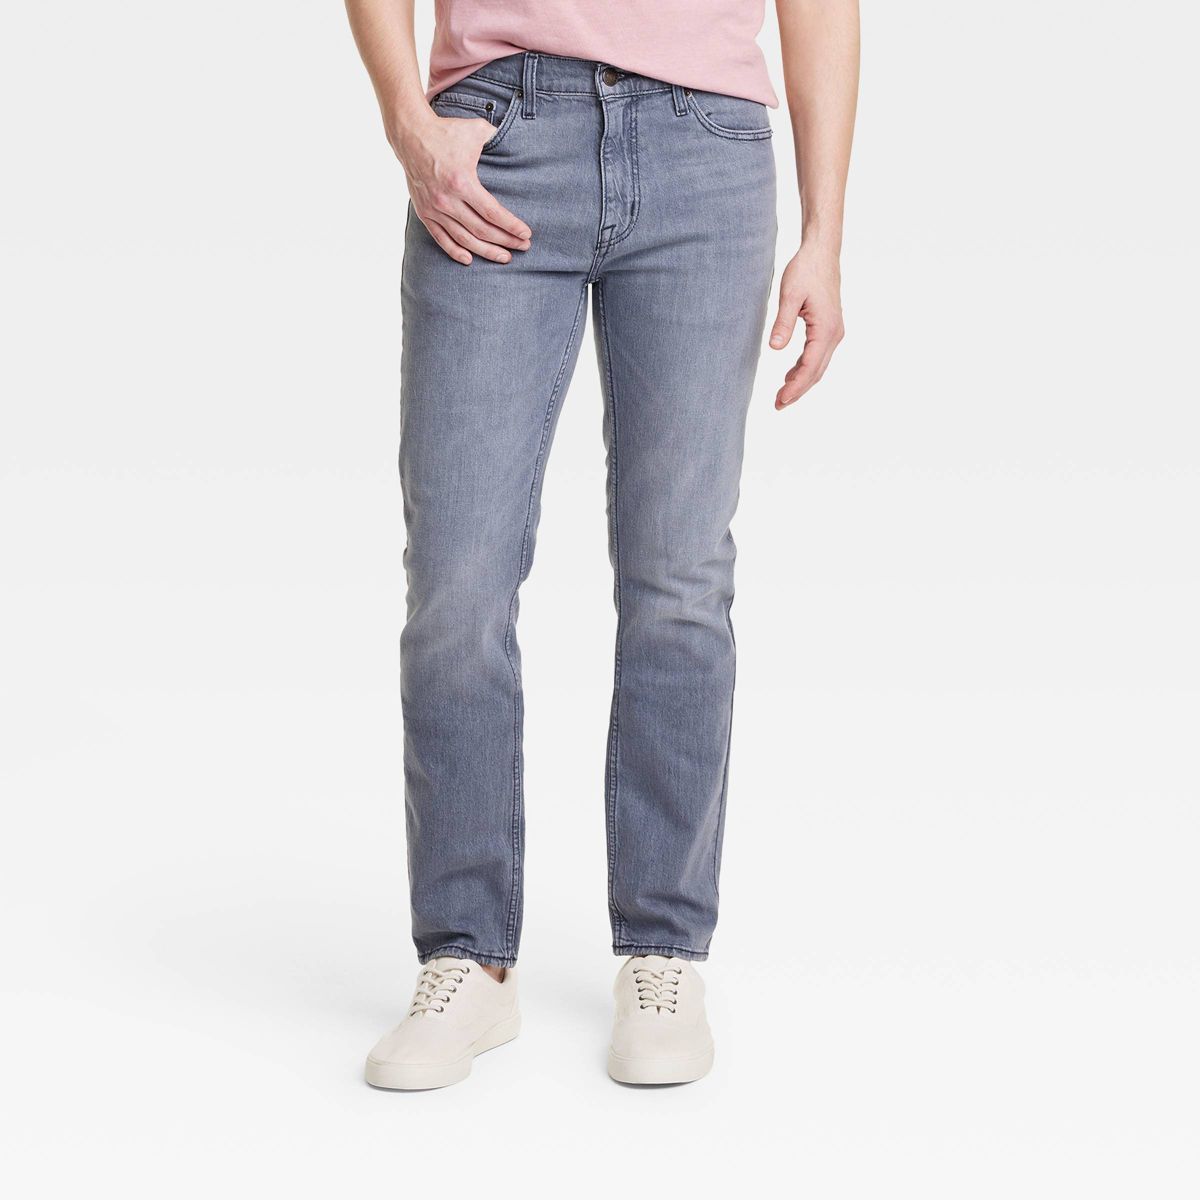 Men's Lightweight Colored Slim Fit Jeans - Goodfellow & Co™ | Target